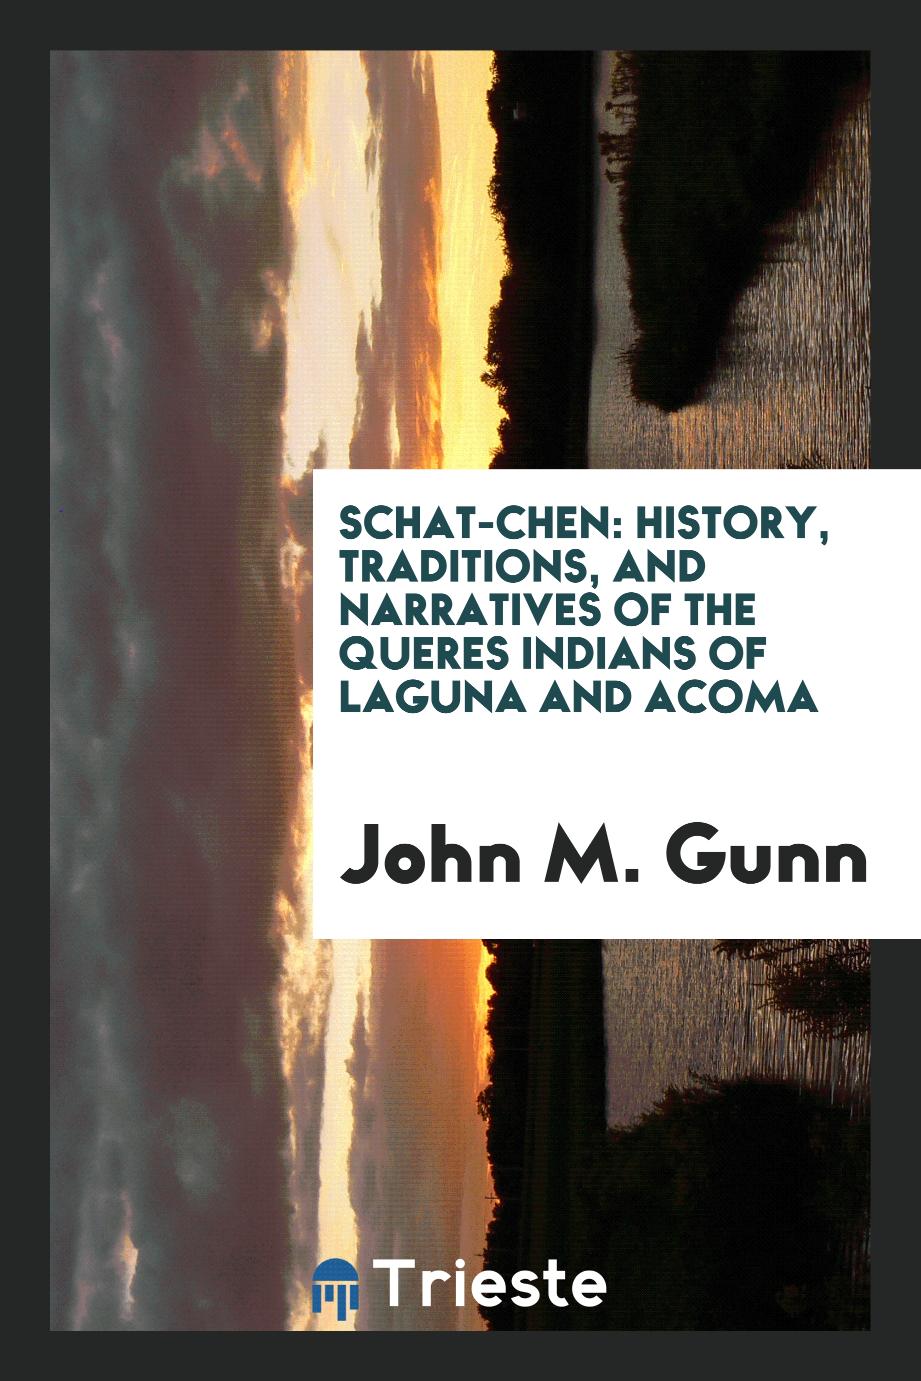 Schat-chen: History, Traditions, and Narratives of the Queres Indians of Laguna and Acoma